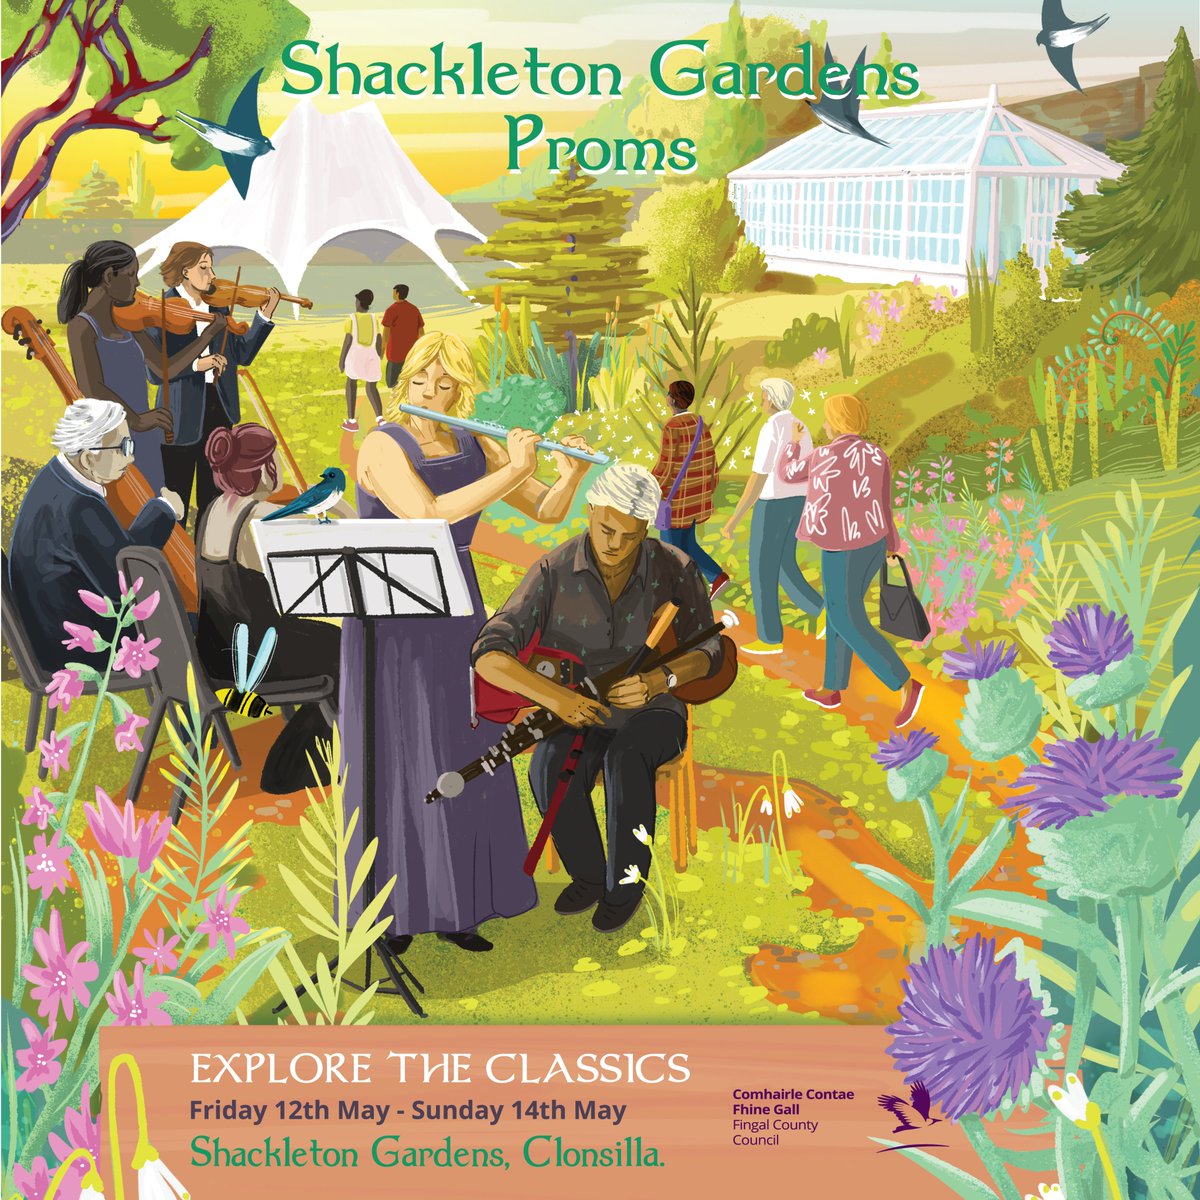 Shackleton Proms is a celebration of the best in Classical music on 12-14 May hosted by Fingal County Council, Festival Director Duo Chagall and Fingal Ensemble at the beautiful Shackleton Gardens, Clonsilla. Tickets for all shows can be purchased here: bit.ly/3ZKgQoC